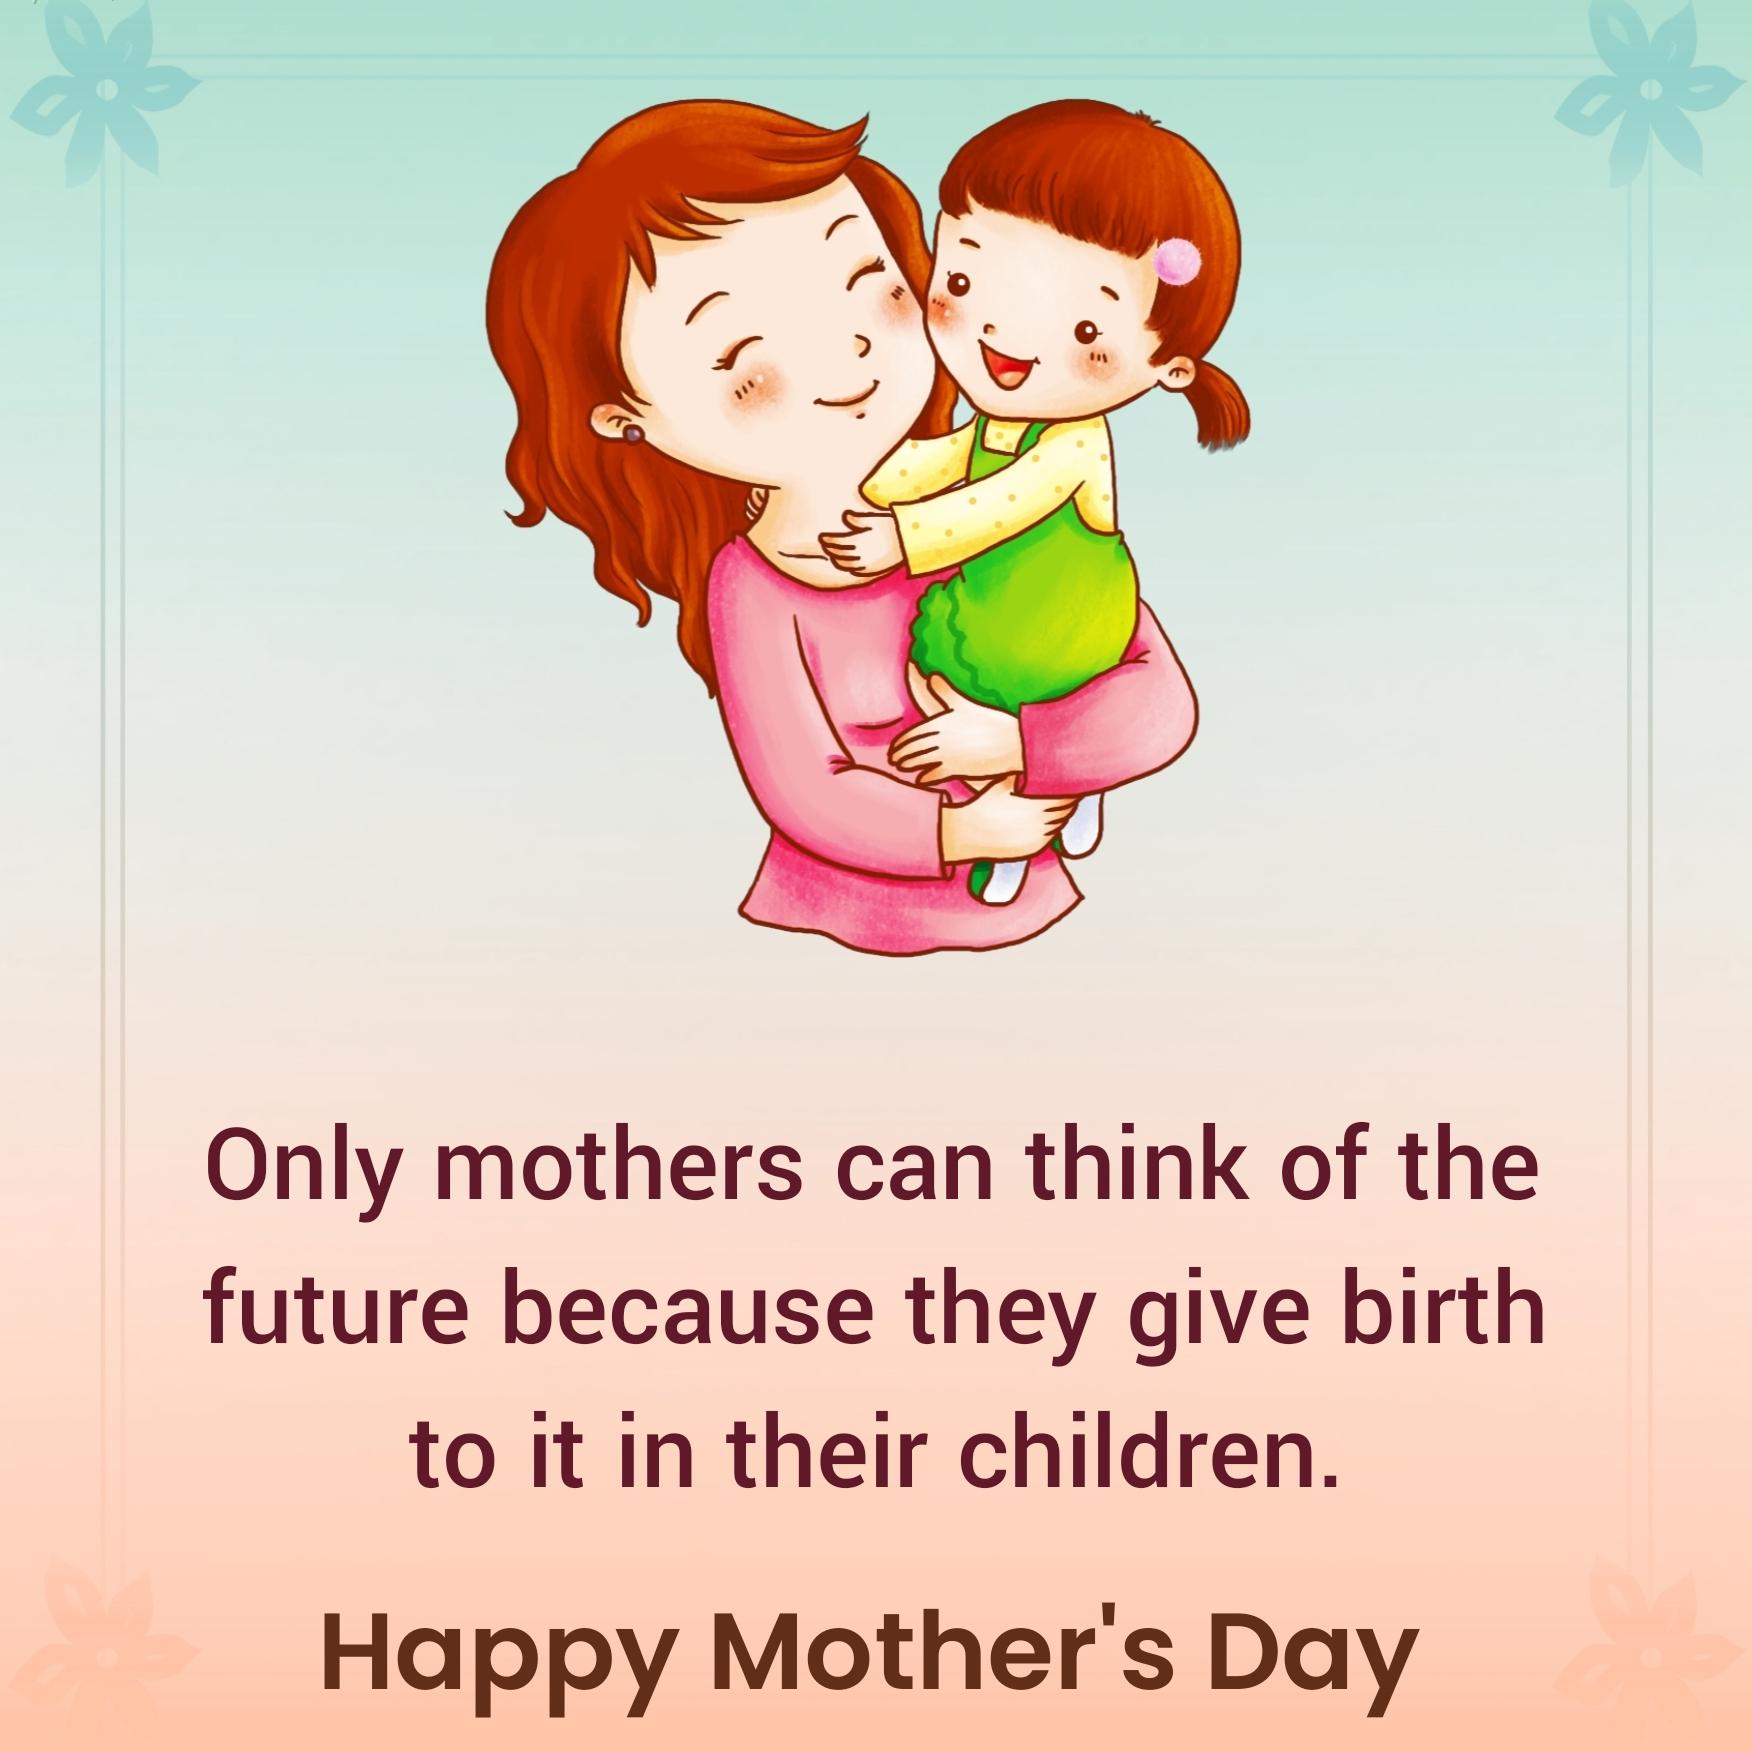 Only mothers can think of the future because they give birth